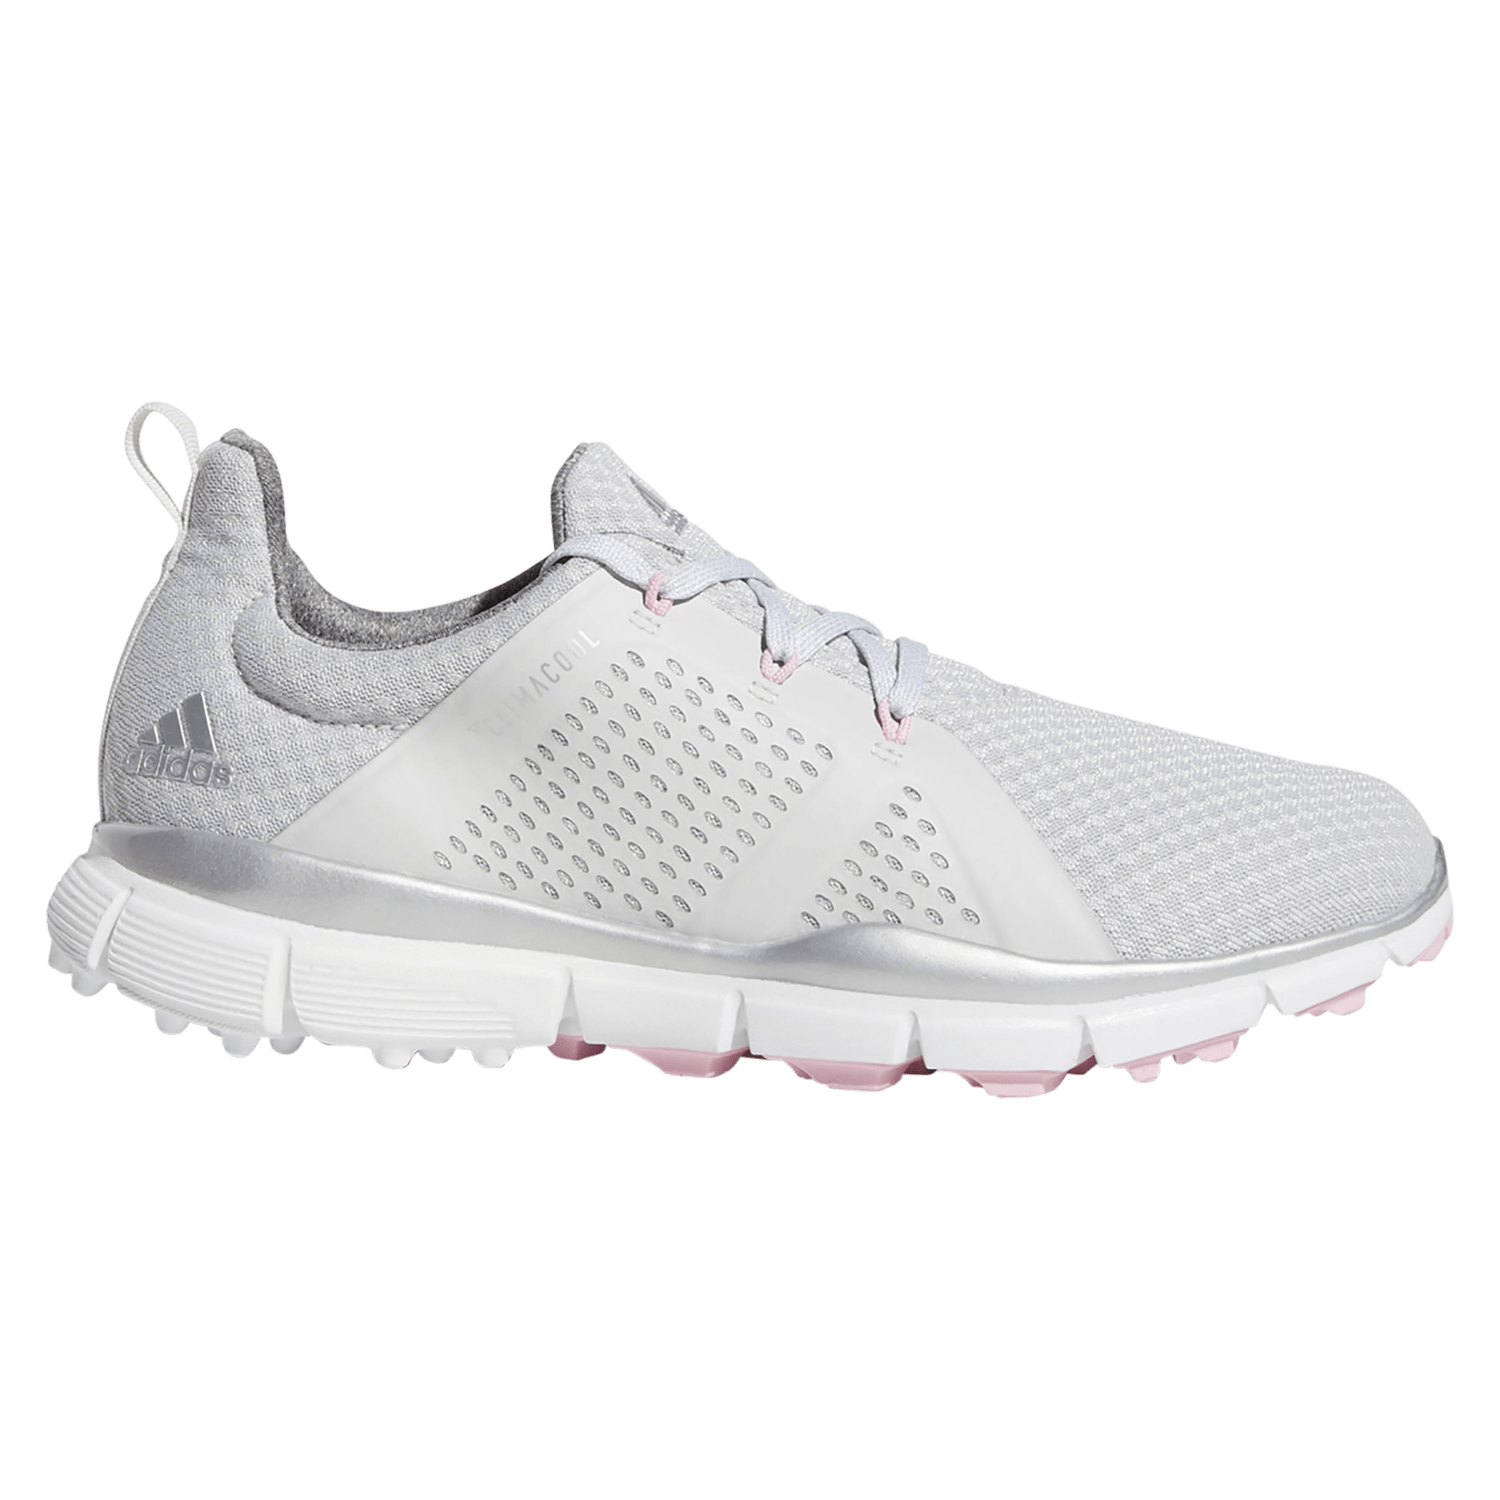 adidas Climacool Cage Women's Golf Shoe 